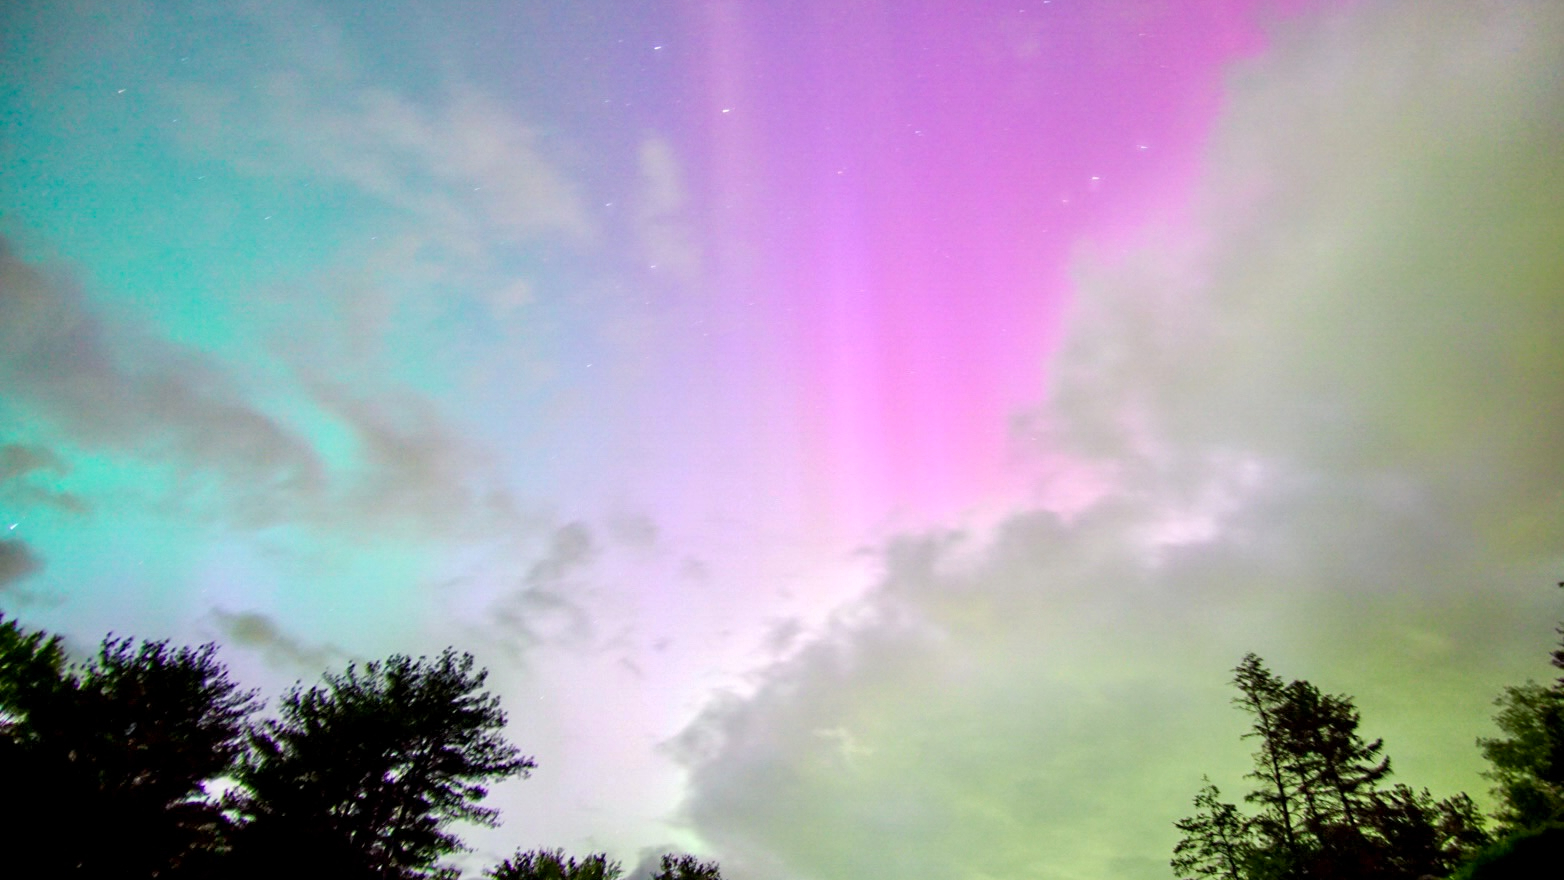 PHOTO GALLERY: Northern lights in Capital Region